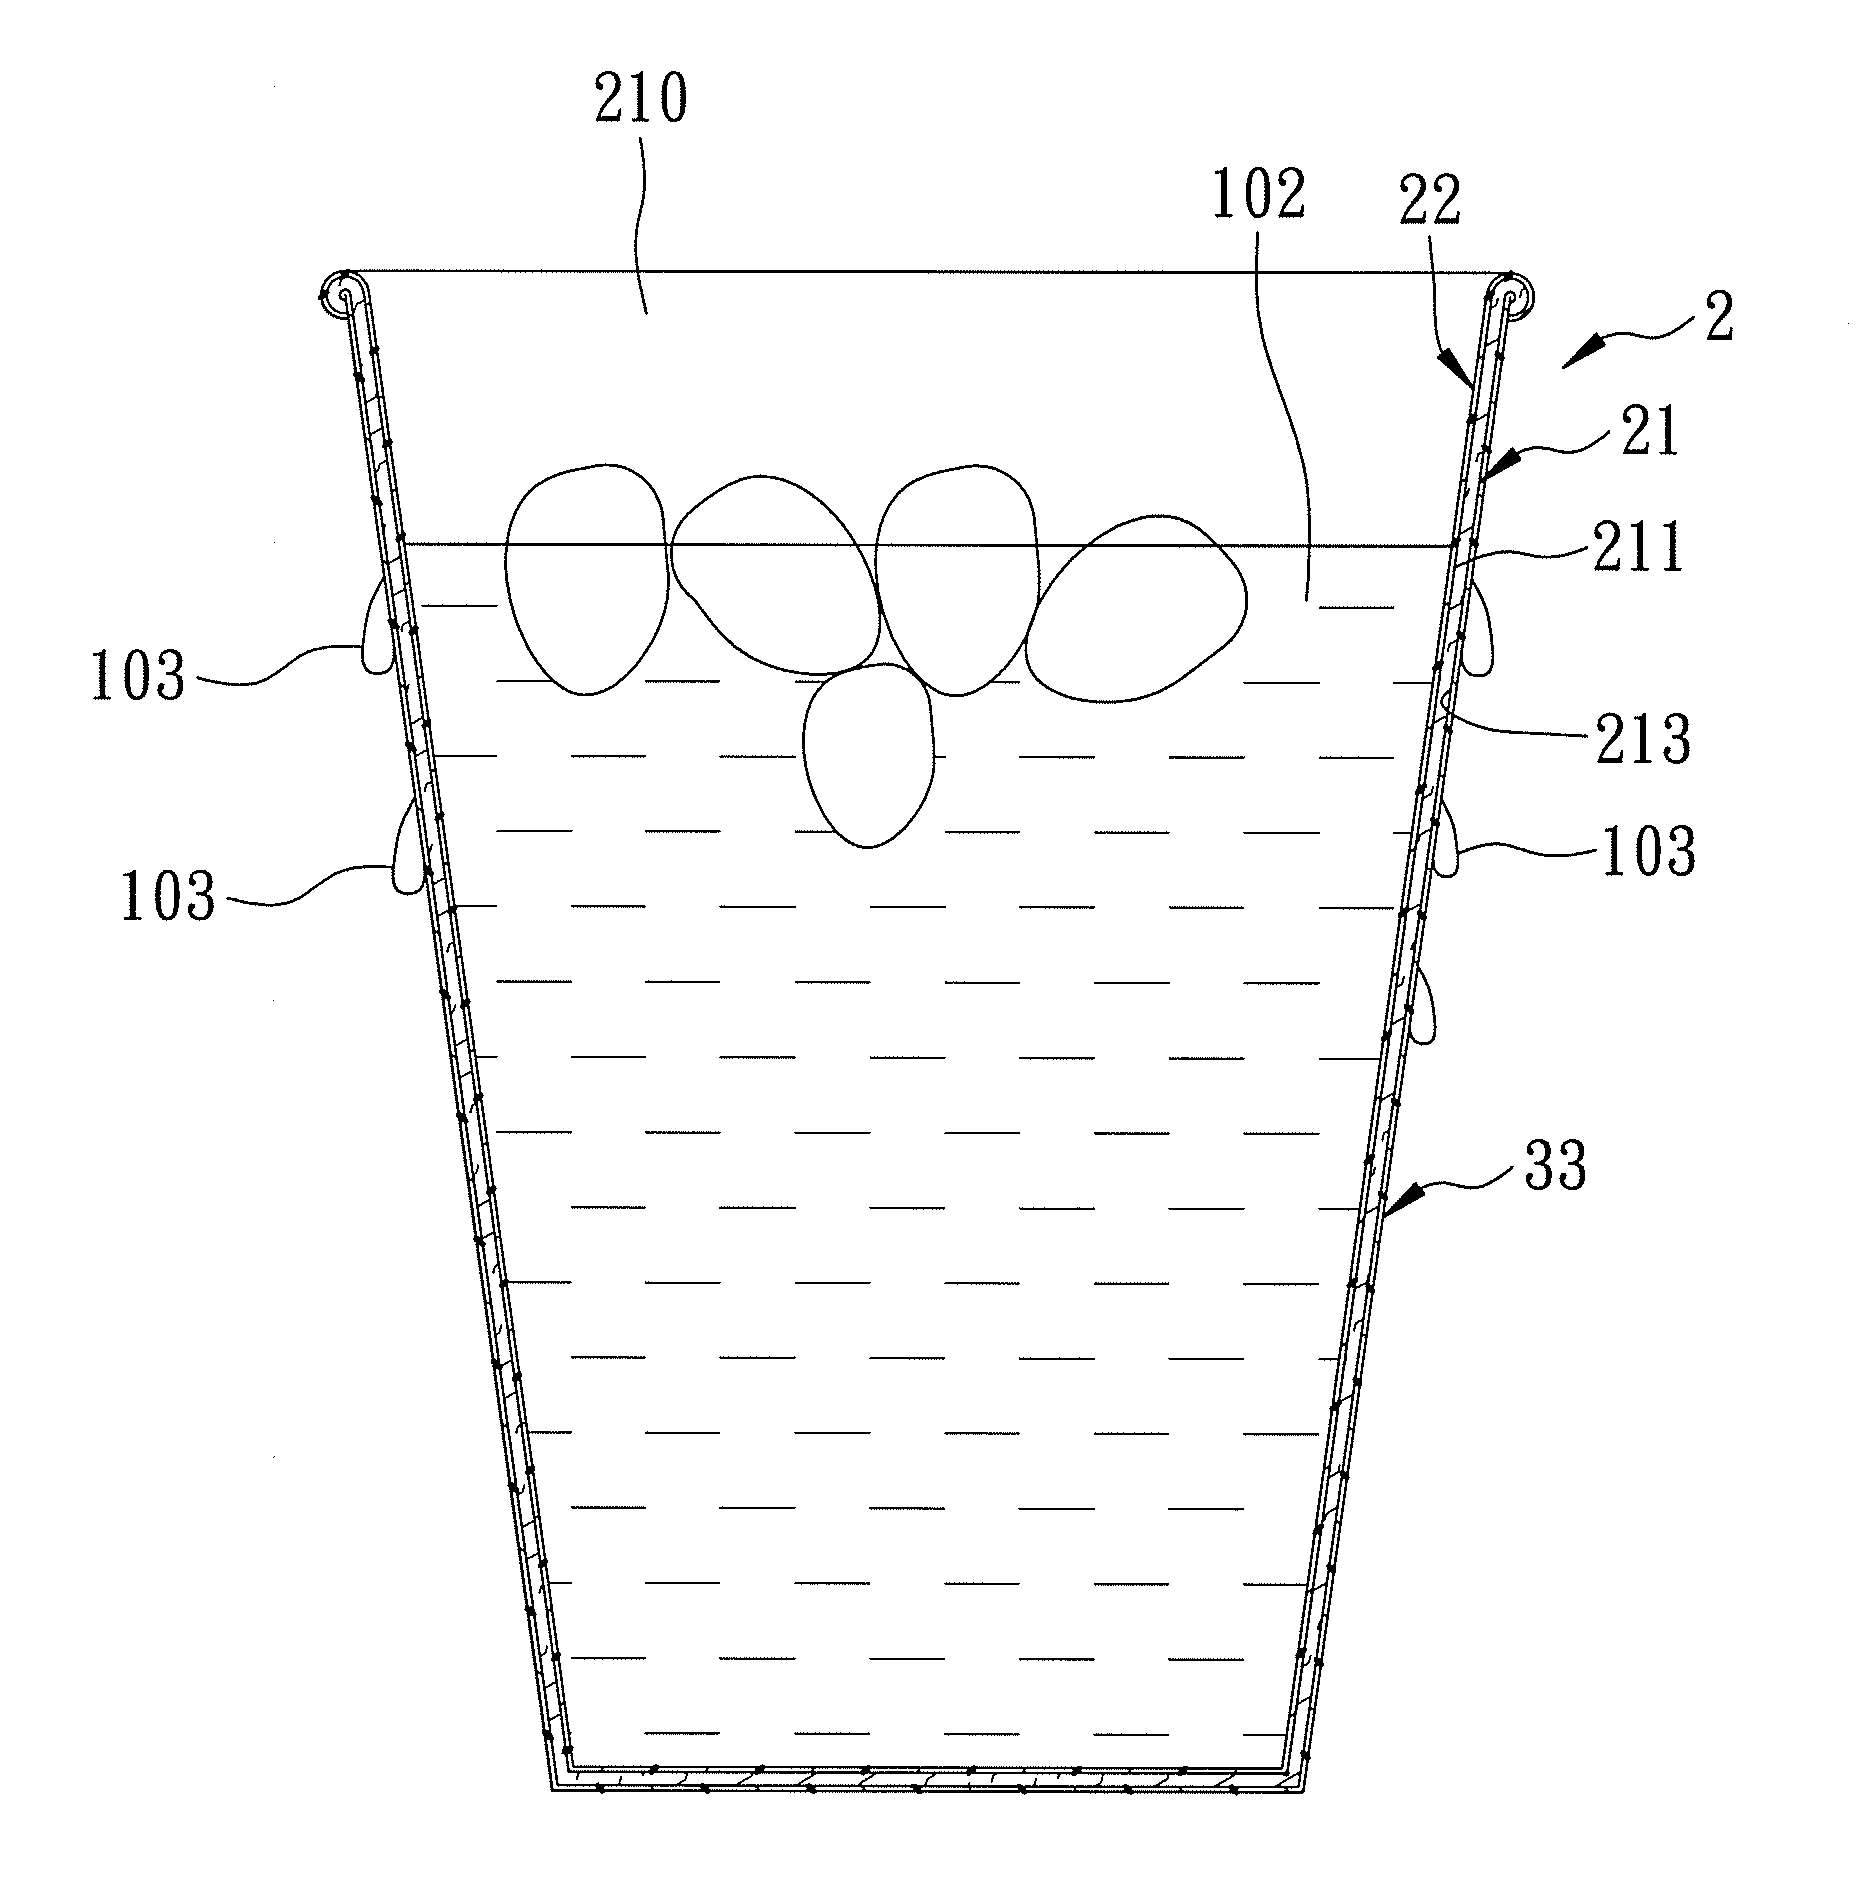 Food container having an inner protecting layer